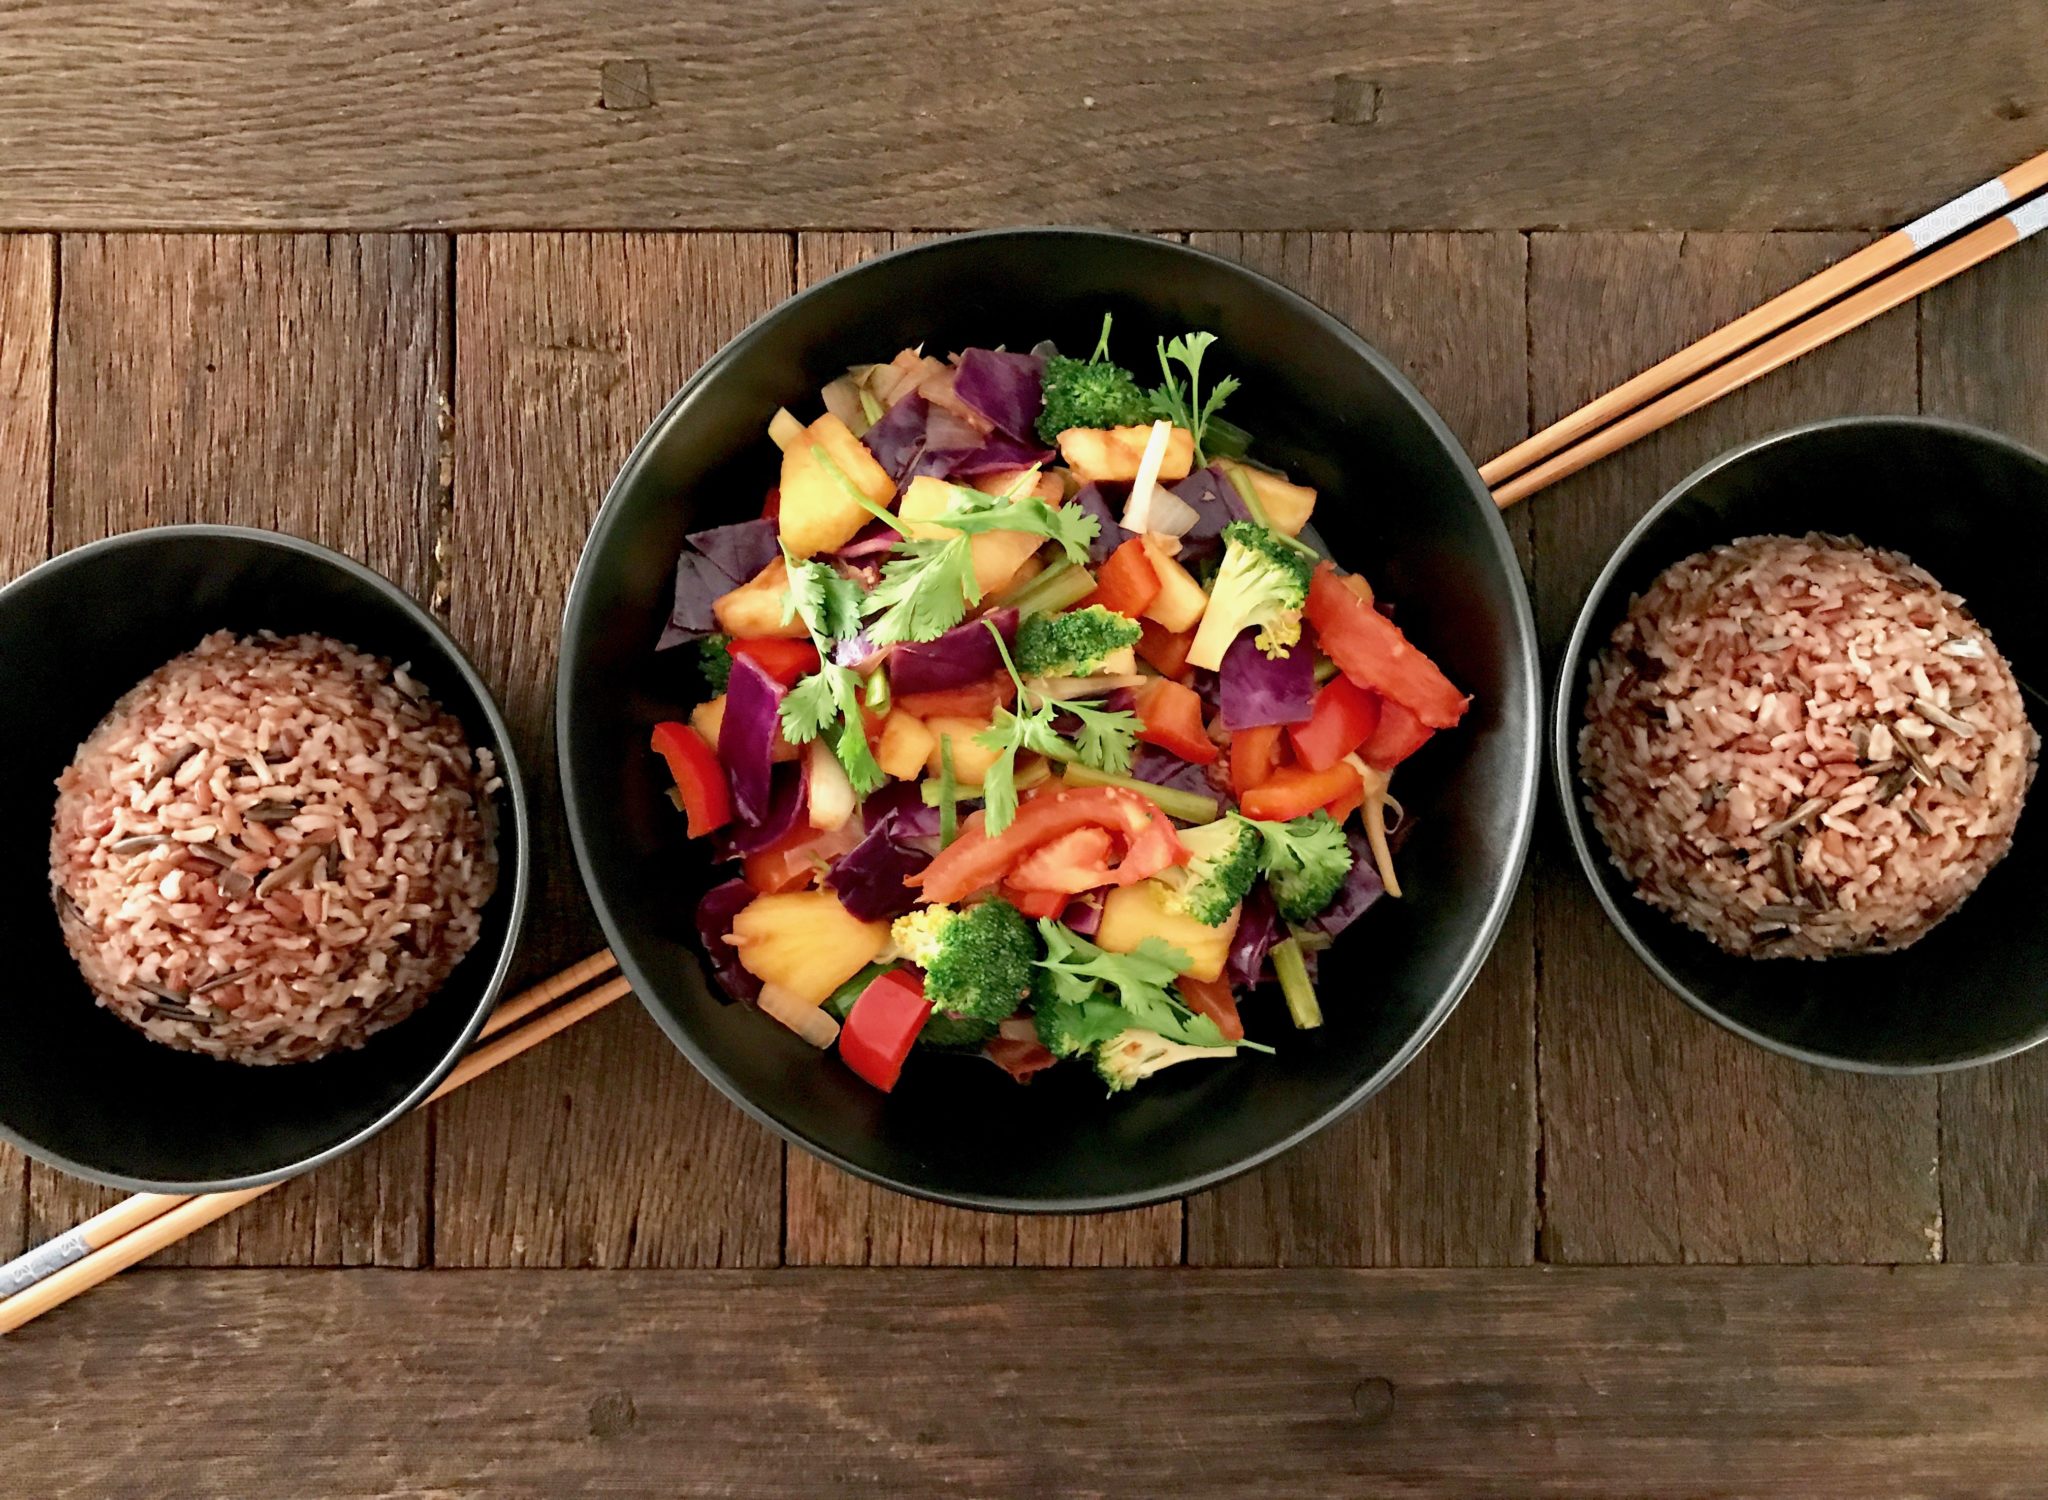 enjoy it with a bowl of rice, or even better with fermented whole rice!